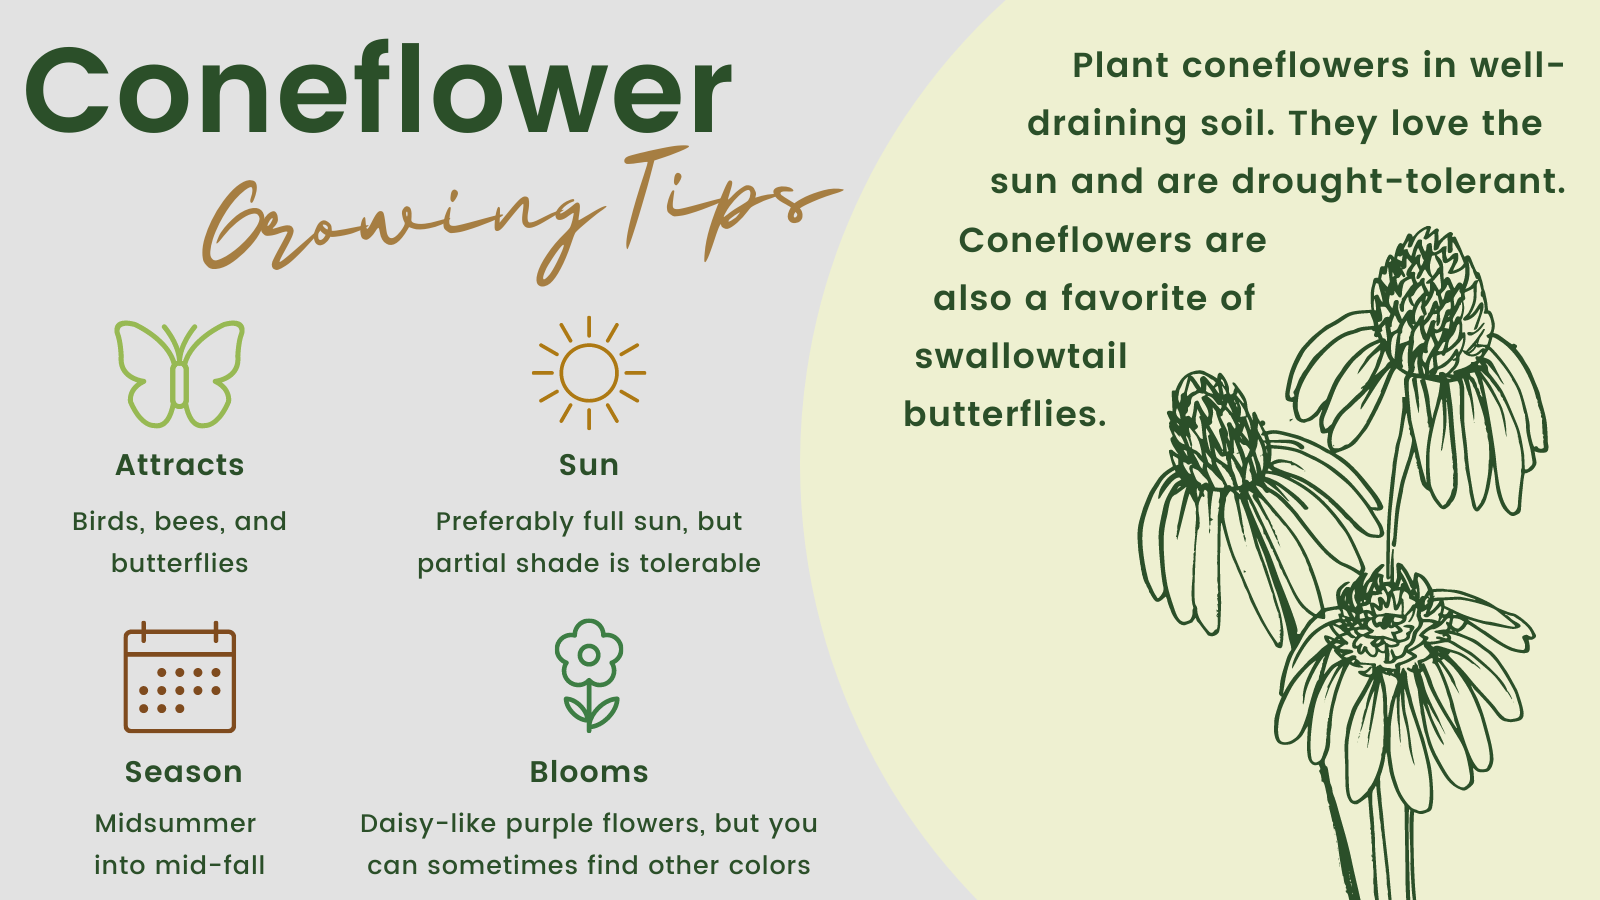 Coneflower Growing Tips: Plant coneflowers in well-draining soil. They love the sun and are drought-tolerant. Coneflowers are also a favorite of swallowtail butterflies. Attracts: Birds, bees, and butterflies. Sun: Preferably full sun, but partial shade is tolerable. Season: Midsummer into mid-fall. Blooms: Daisy-like purple flowers, but you can sometimes find other colors.